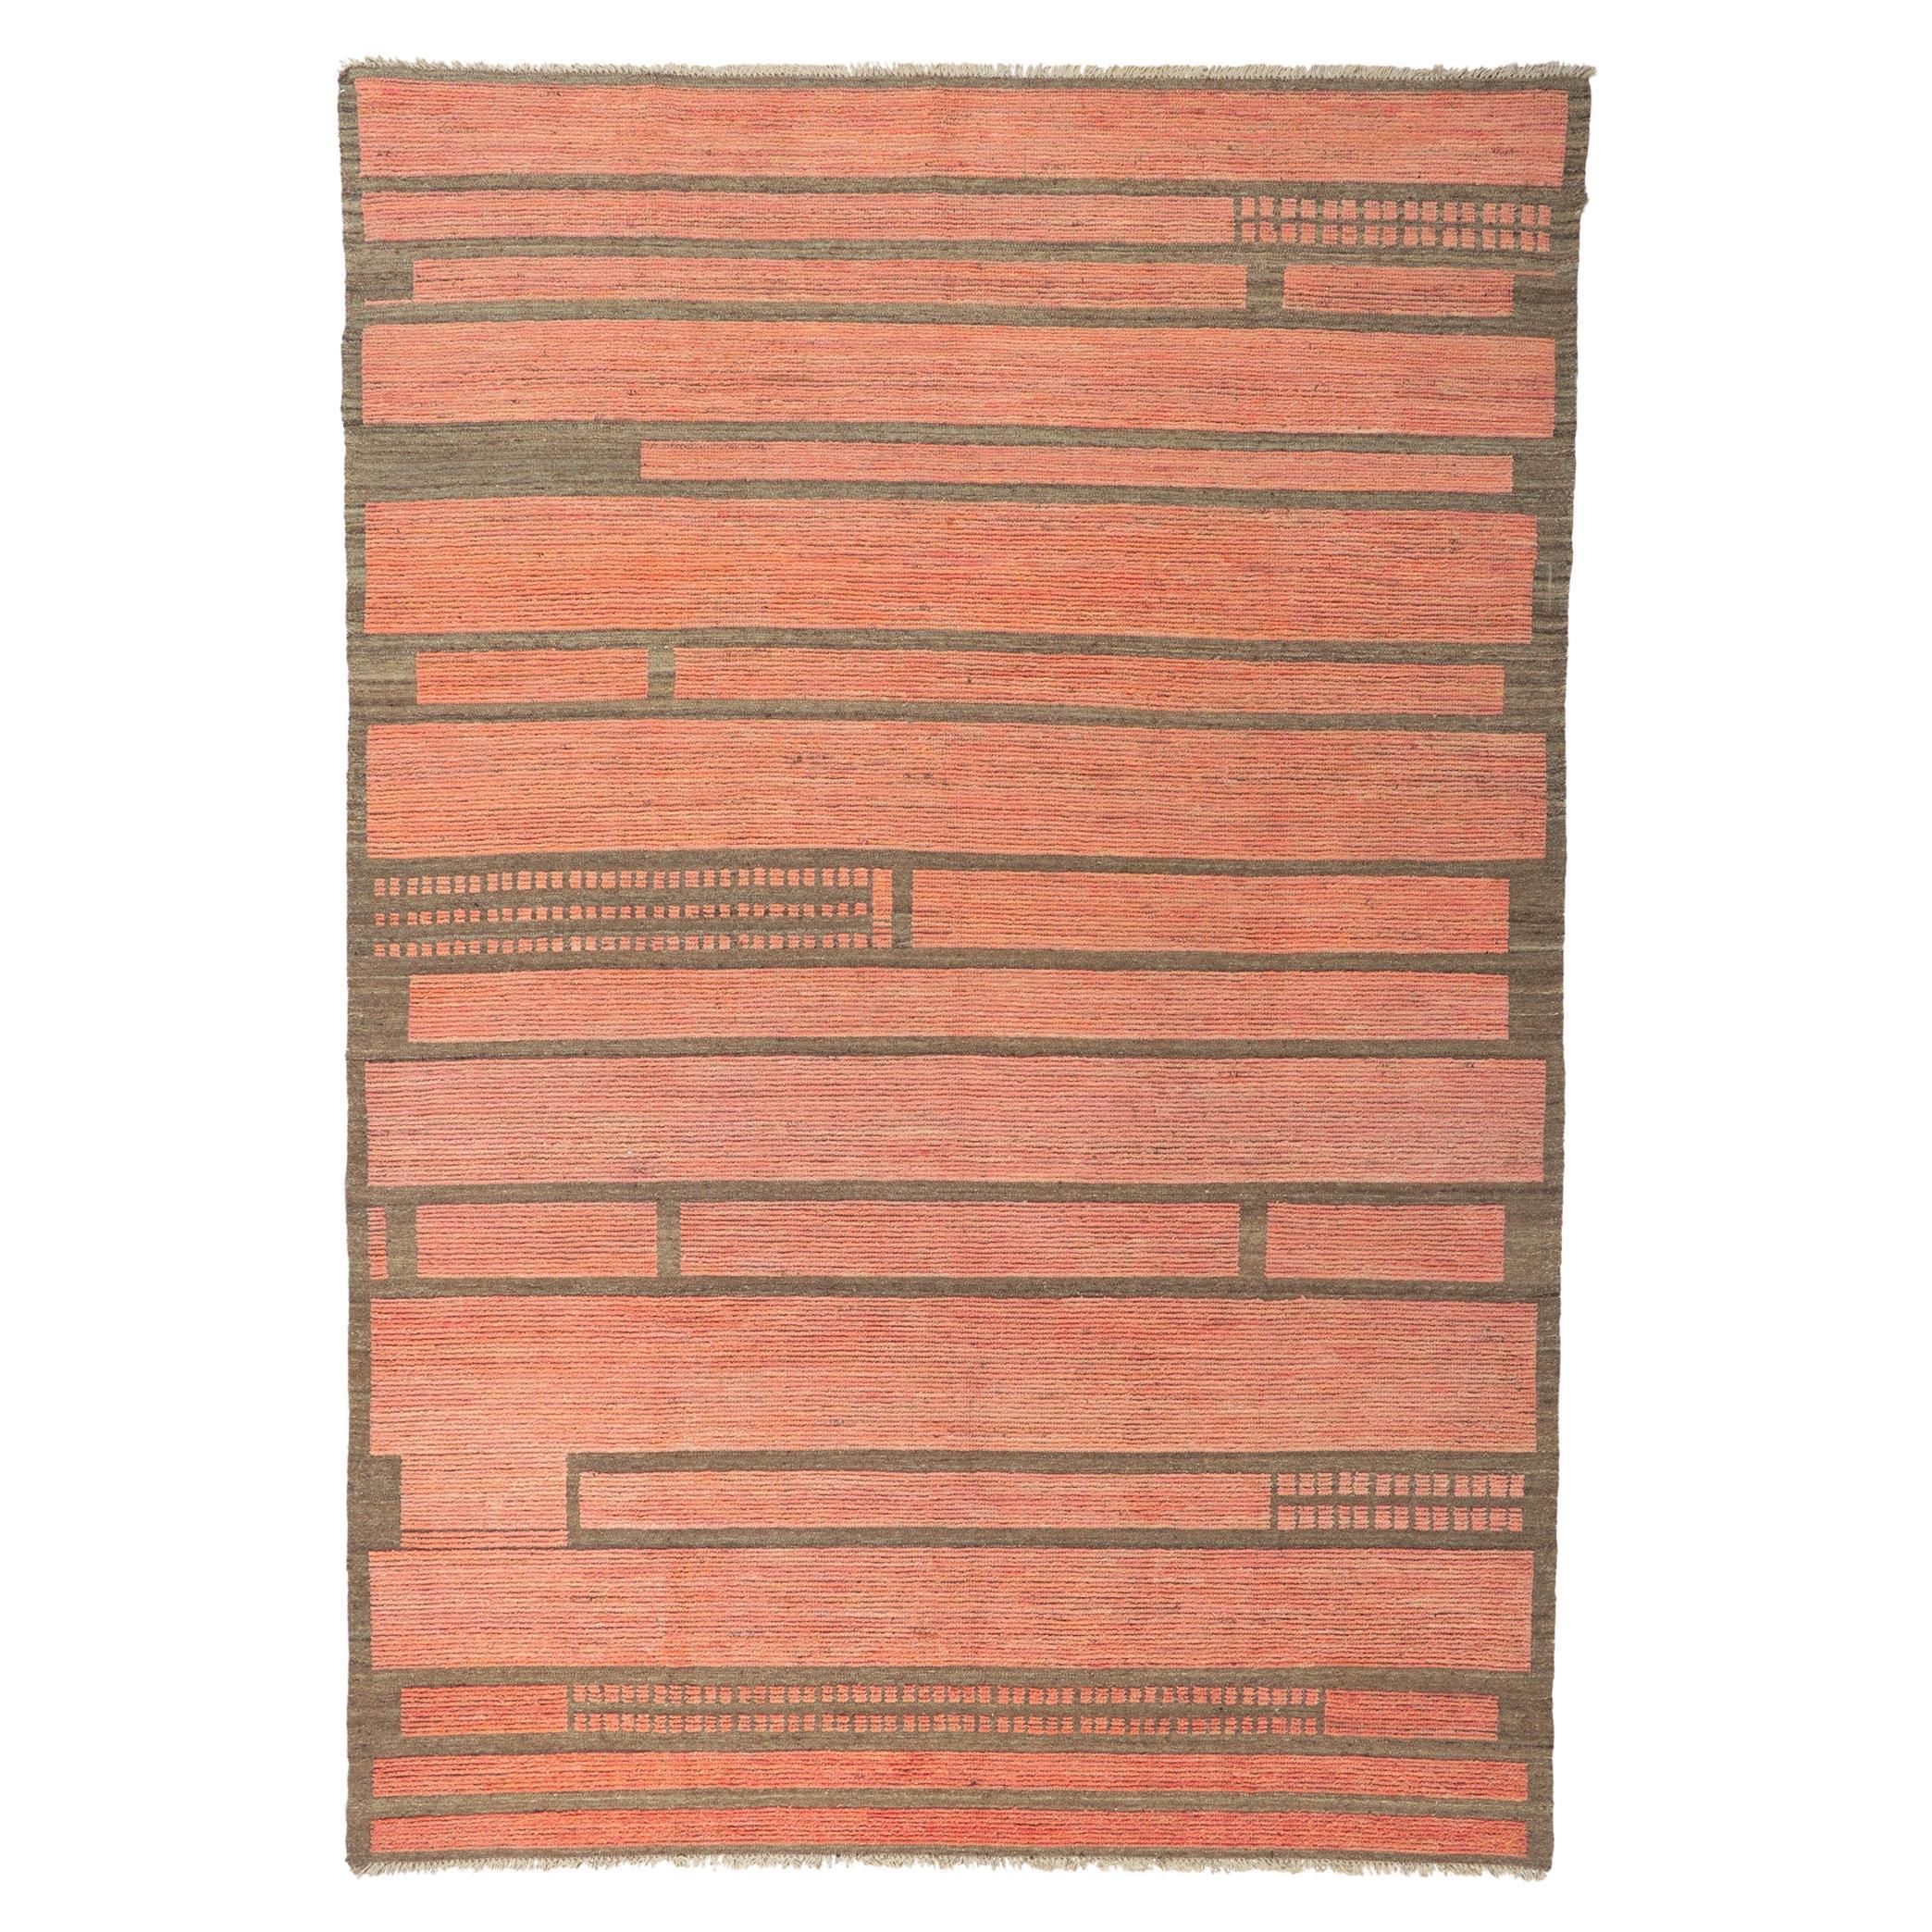 New Contemporary Moroccan Rug with Bauhaus Style